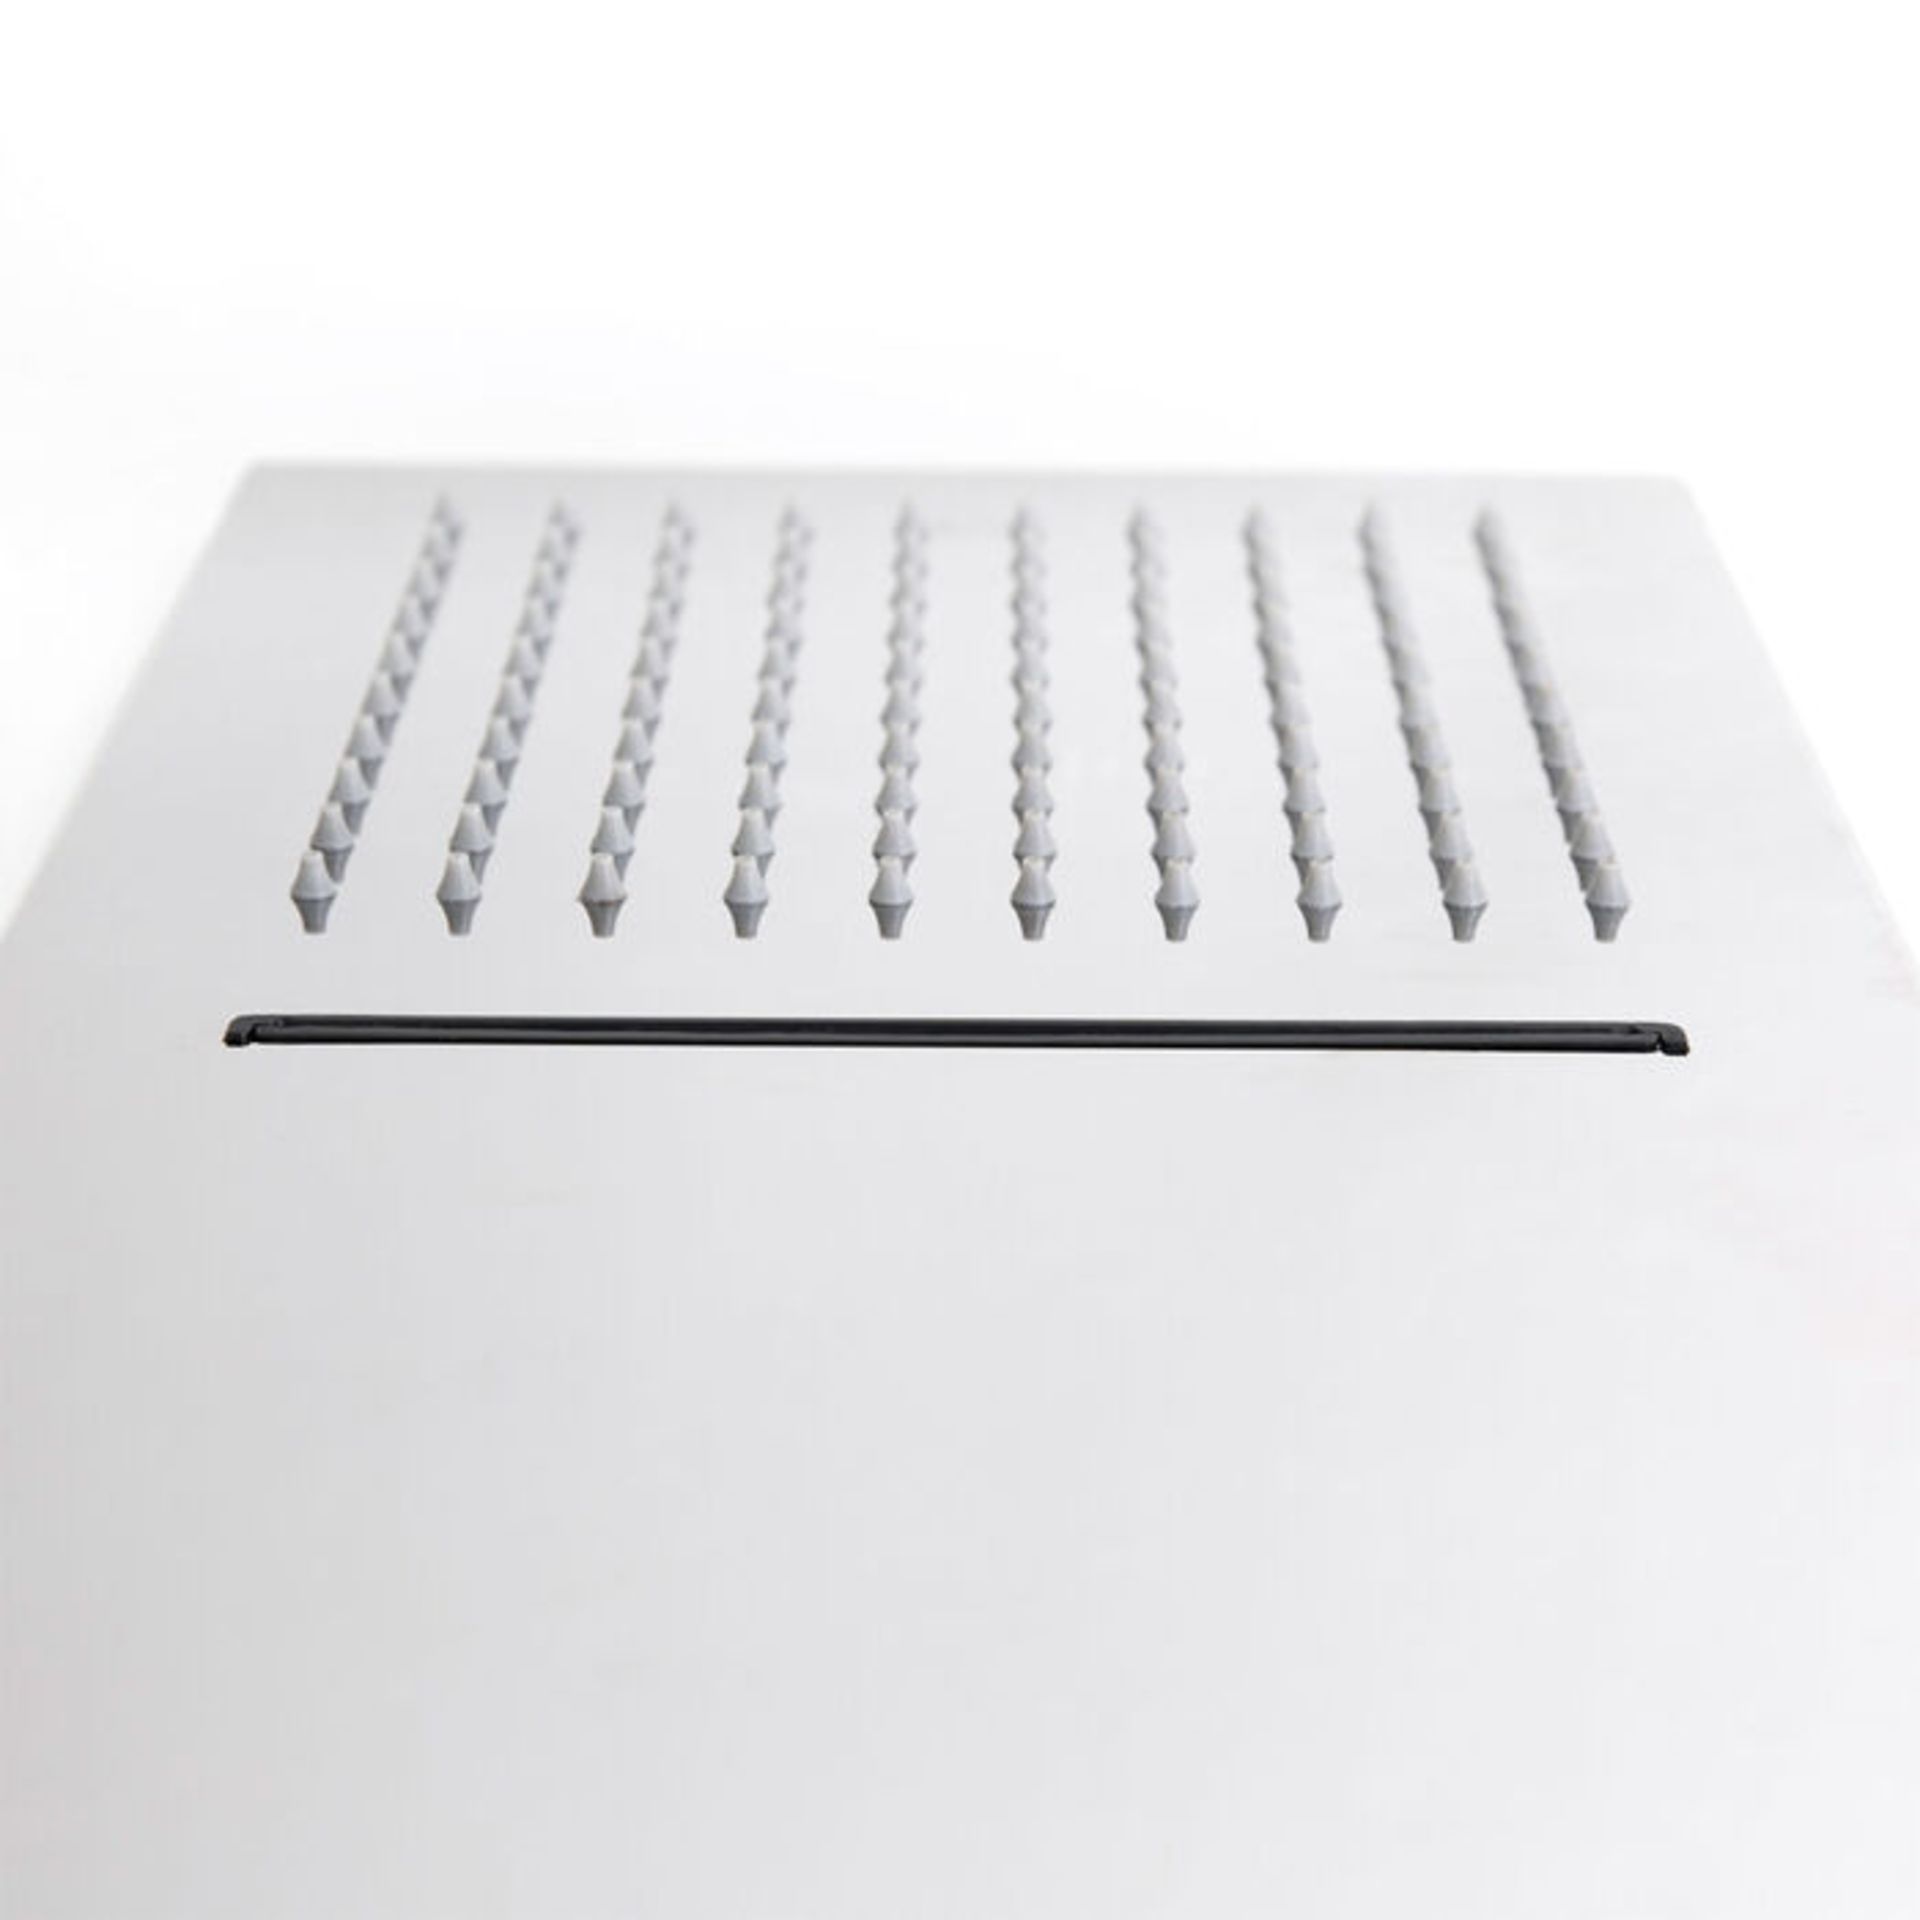 (JG3) NEW & BOXED Two Way Thin Waterfall Shower Head. RRP £374.99.Choice of a waterfall or rai... - Image 3 of 3